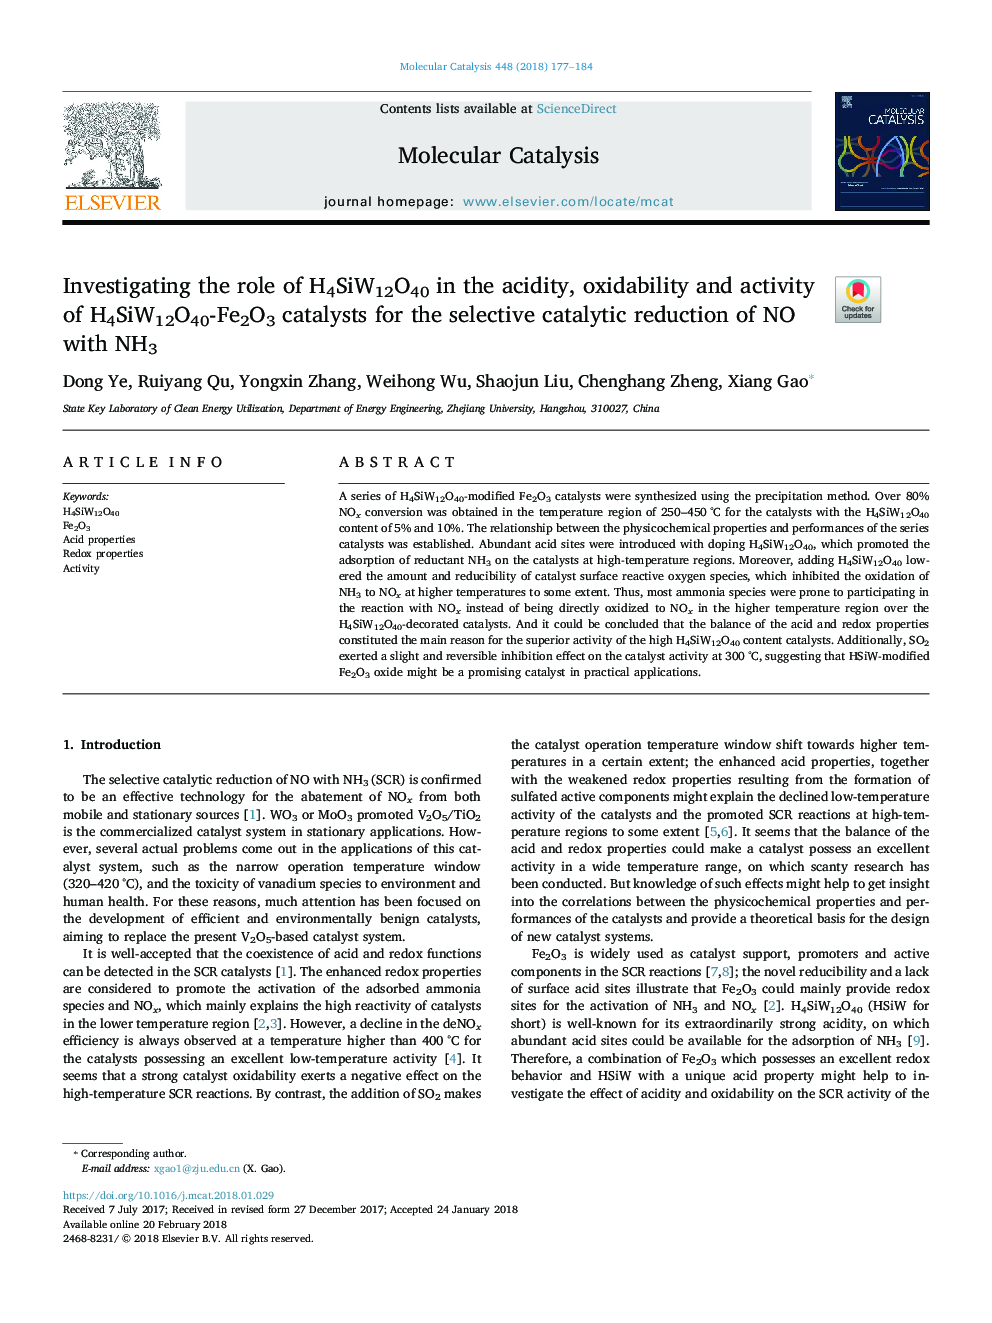 Investigating the role of H4SiW12O40 in the acidity, oxidability and activity of H4SiW12O40-Fe2O3 catalysts for the selective catalytic reduction of NO with NH3